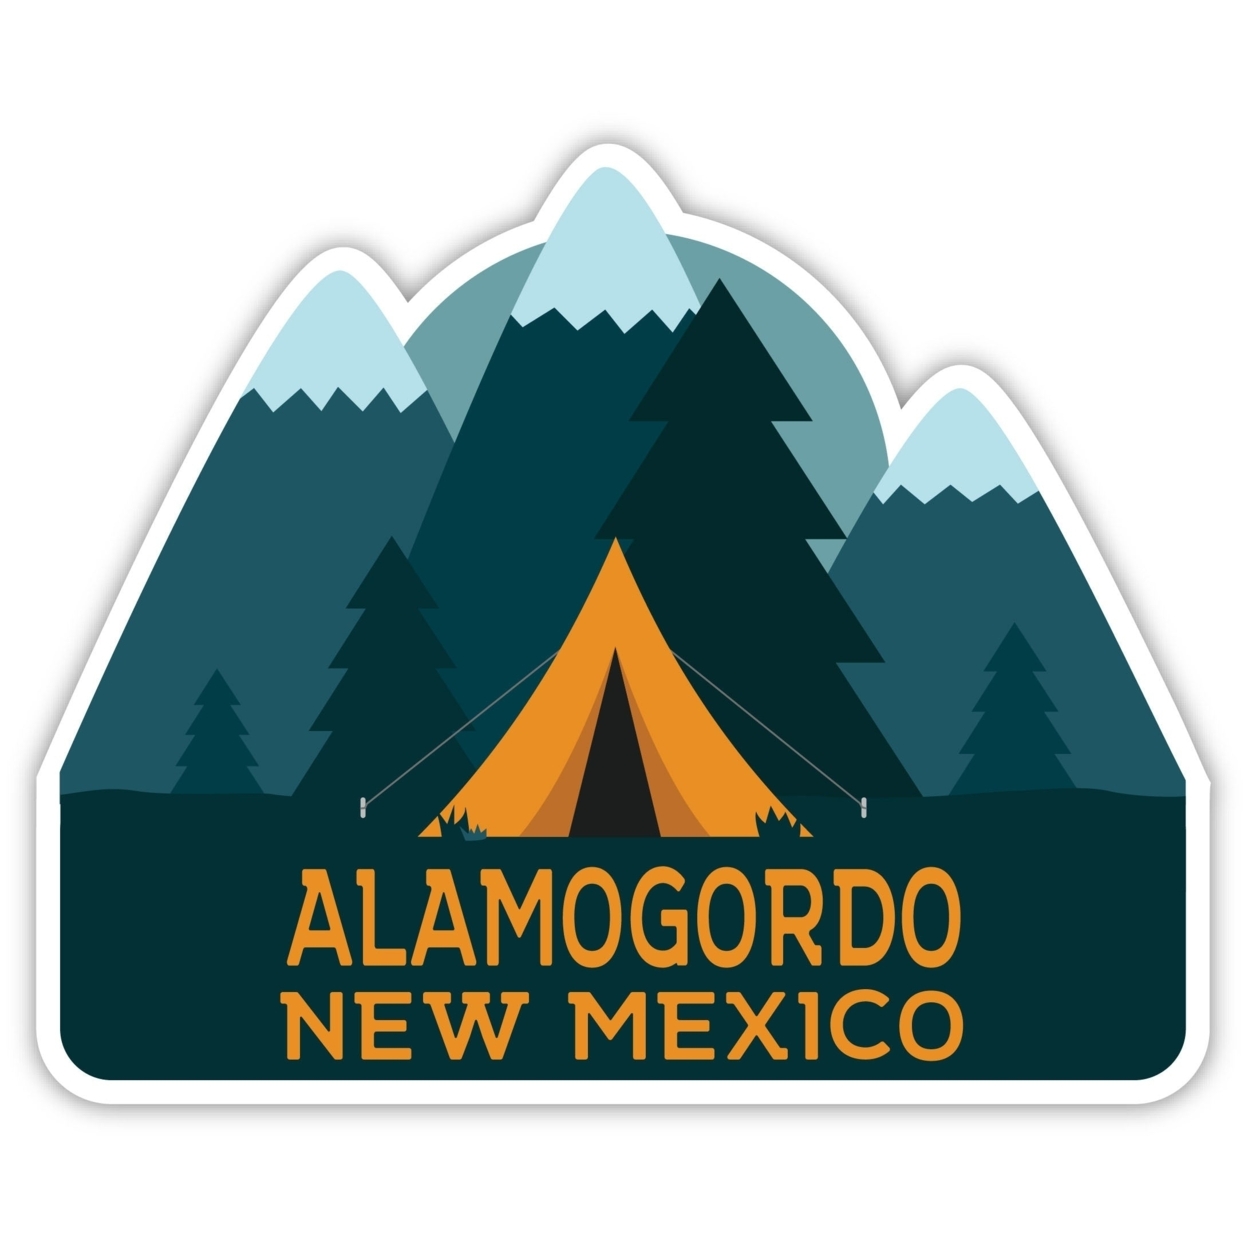 Alamogordo New Mexico Souvenir Decorative Stickers (Choose Theme And Size) - 4-Pack, 8-Inch, Adventures Awaits